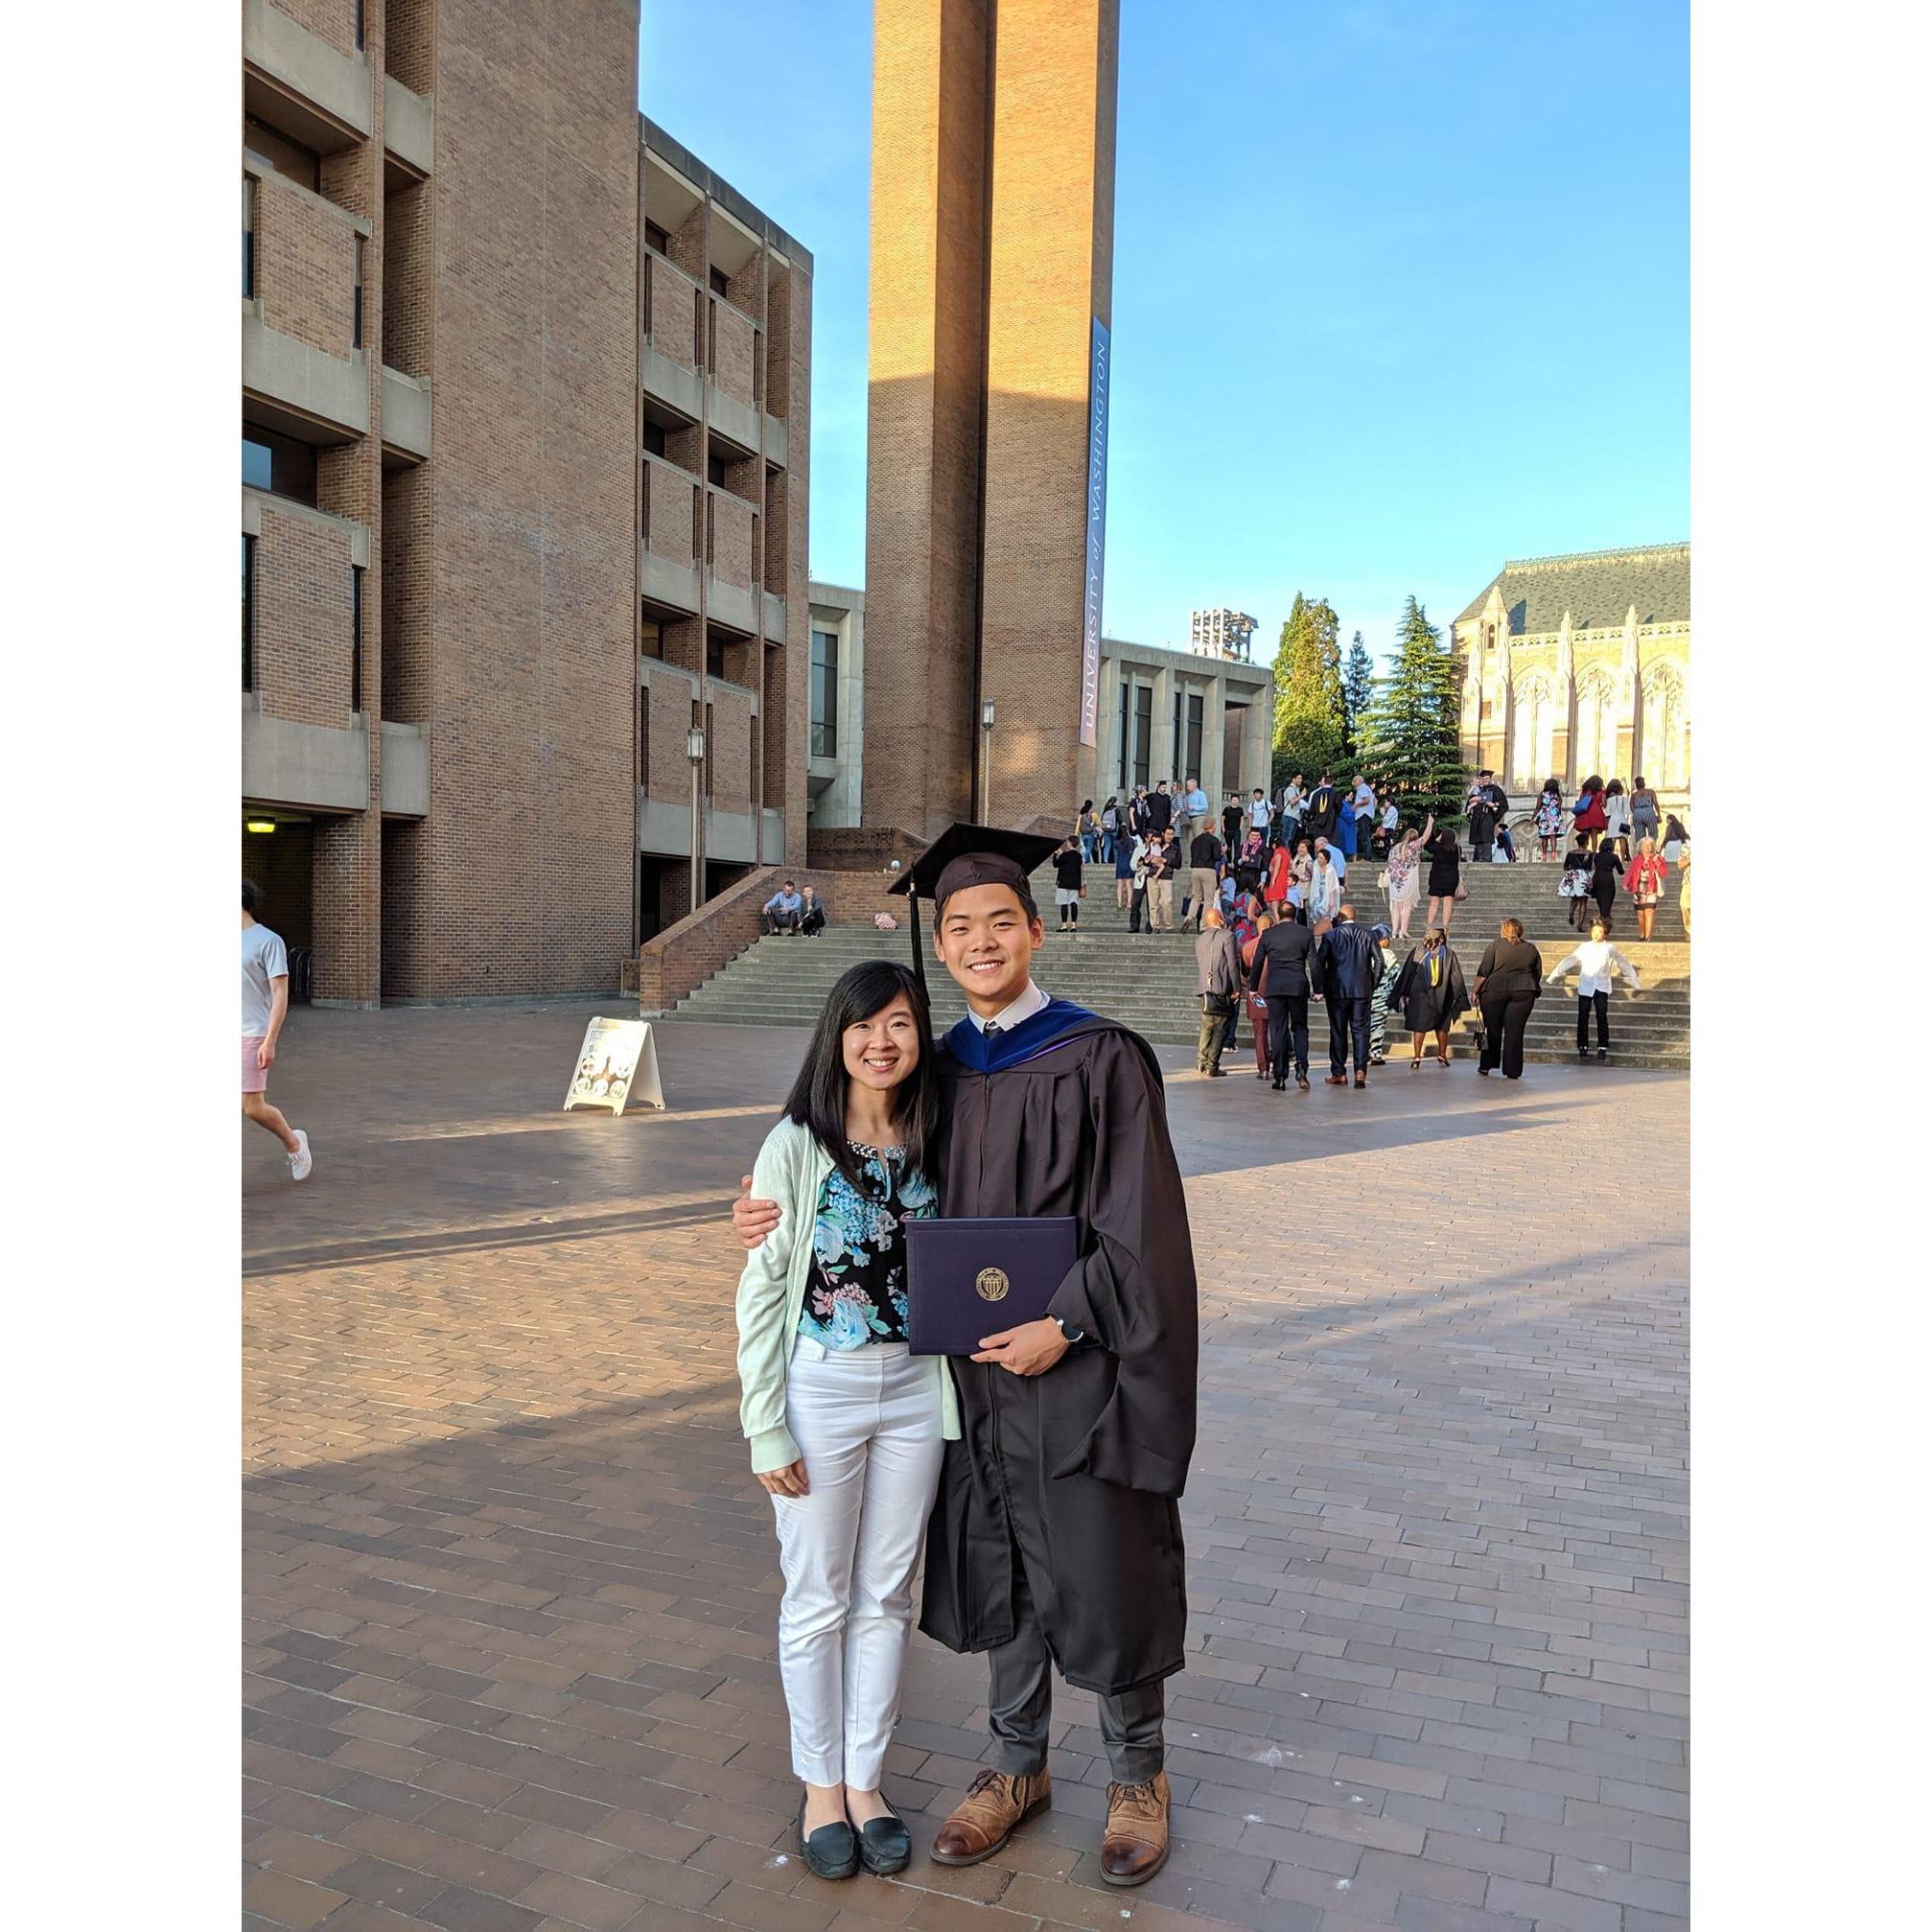 Spring 2019 - You'd think that at some point, we would stop paying UW so much tuition. But nope, Steven goes back to school and graduates with his SECOND Master's!